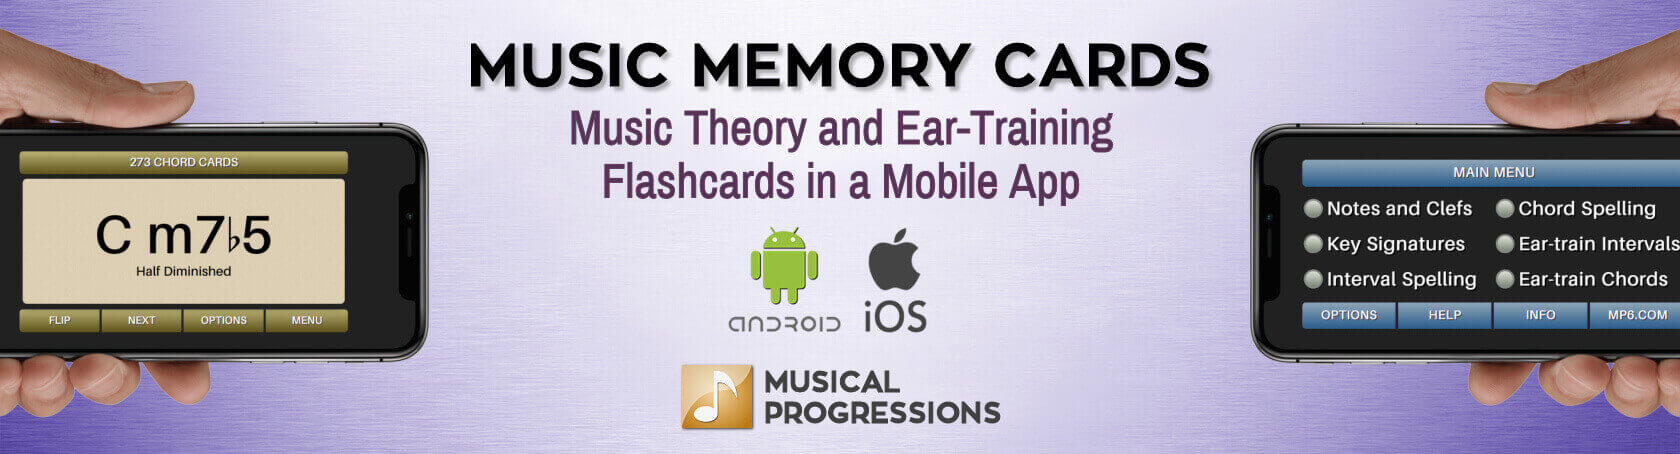 Music Memory Cards - Helping theory students memorize musical concepts.